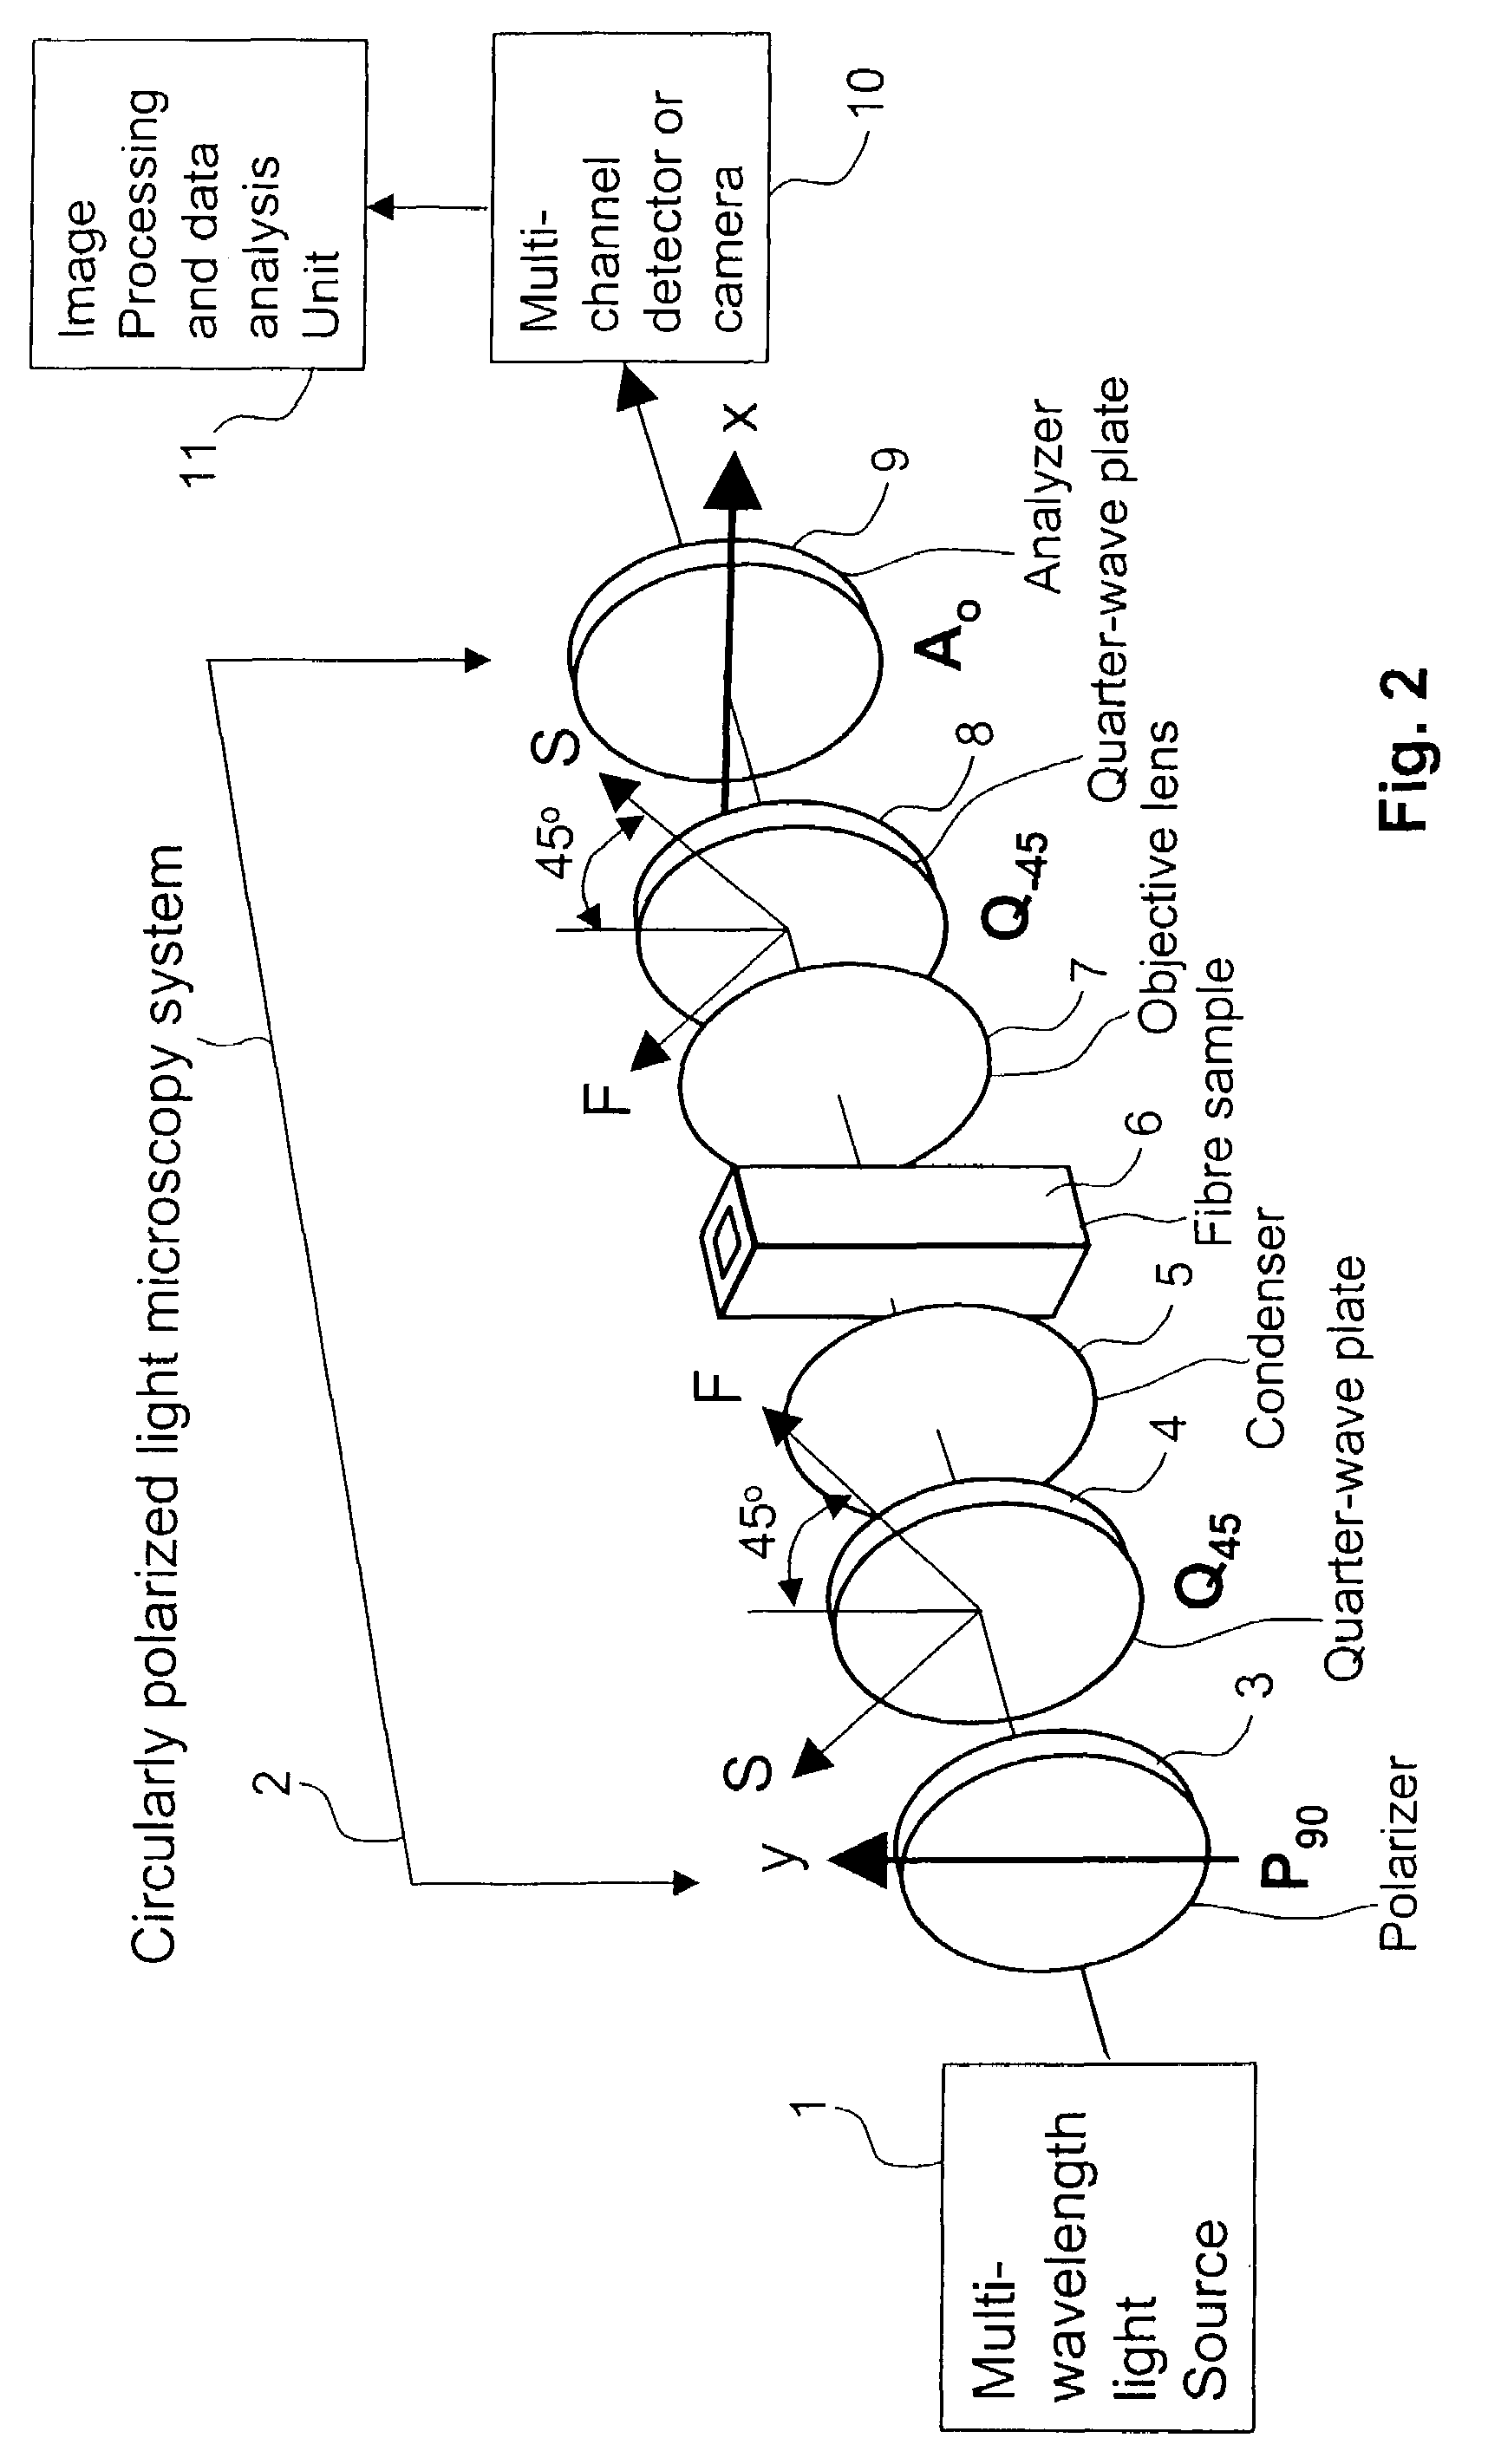 Circularly polarized light method and device for determining wall thickness and orientations of fibrils of cellulosic fibres